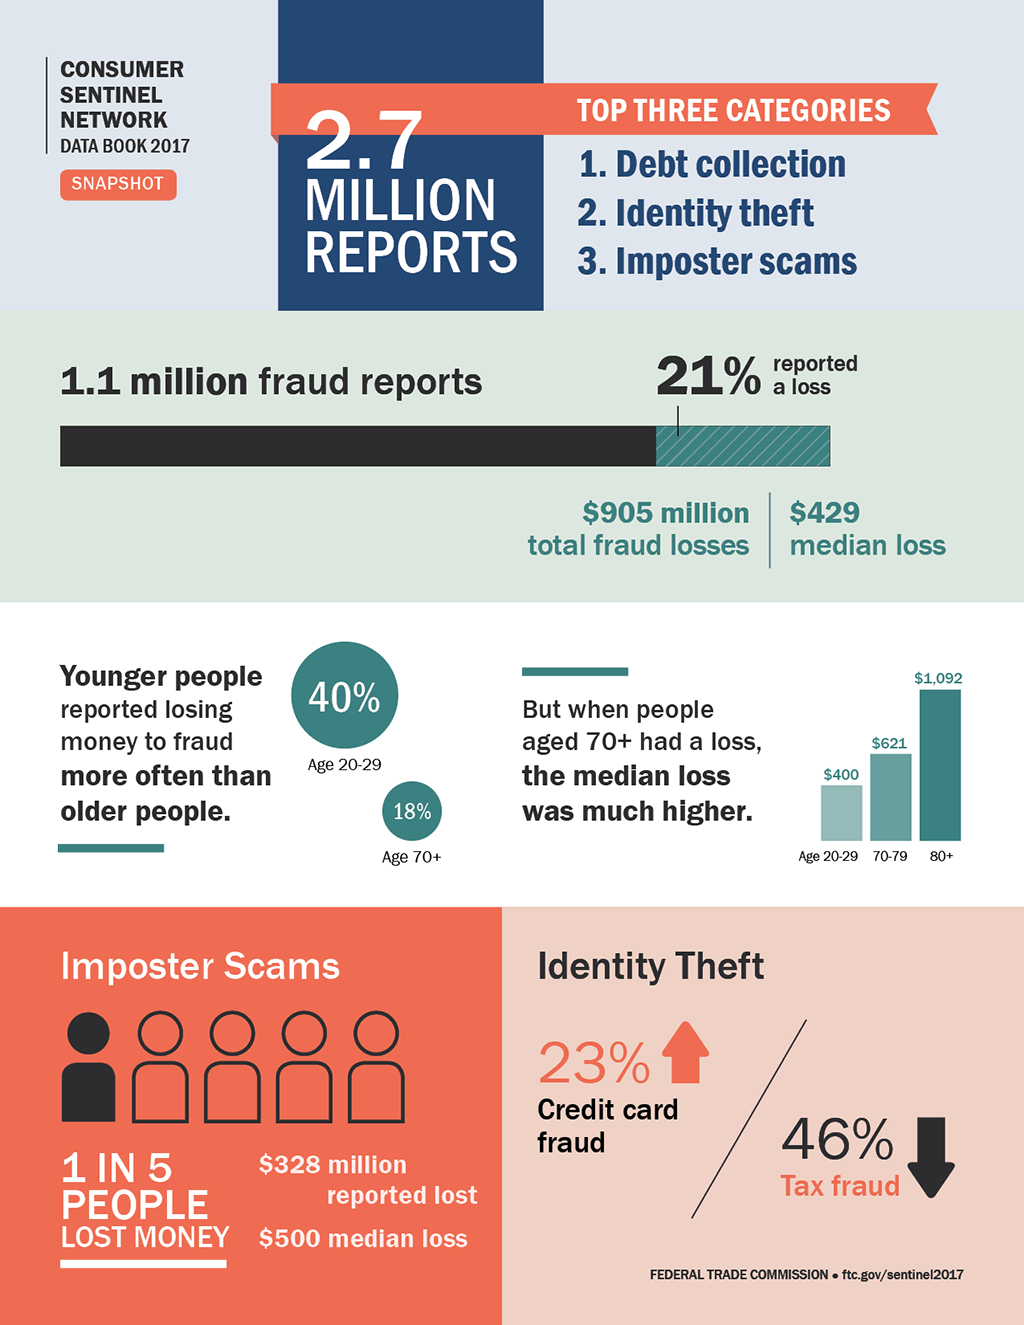 Consumer Sentinel Network Data Book 2017 Snapshot.  2.7 million reports. Top three categories:  1.	Debt collection 2.	Identity theft 3.	Imposter scams  Of 1.1 million fraud reports, 21% reported a loss. $905 million total fraud losses; $429 median loss.  Younger people reported losing money to fraud more often than older people.  40% of reports from people age 20-29 reported a loss; 18% of reports from people age 70+ reported a loss.  But when people aged 70+ had a loss, the median loss was much higher. Median loss $400 for age 20-29; median loss $621 for age 70-79; median loss $1,092 for age 80+.  Imposter scam reports: 1 in 5 people lost money to a reported imposter scam. $328 million reported lost; $500 median loss.  Identity theft reports: Credit card fraud increased 23% from 2016. Tax fraud decreased 46% from 2016.  Federal Trade Commission. ftc.gov/sentinel2017